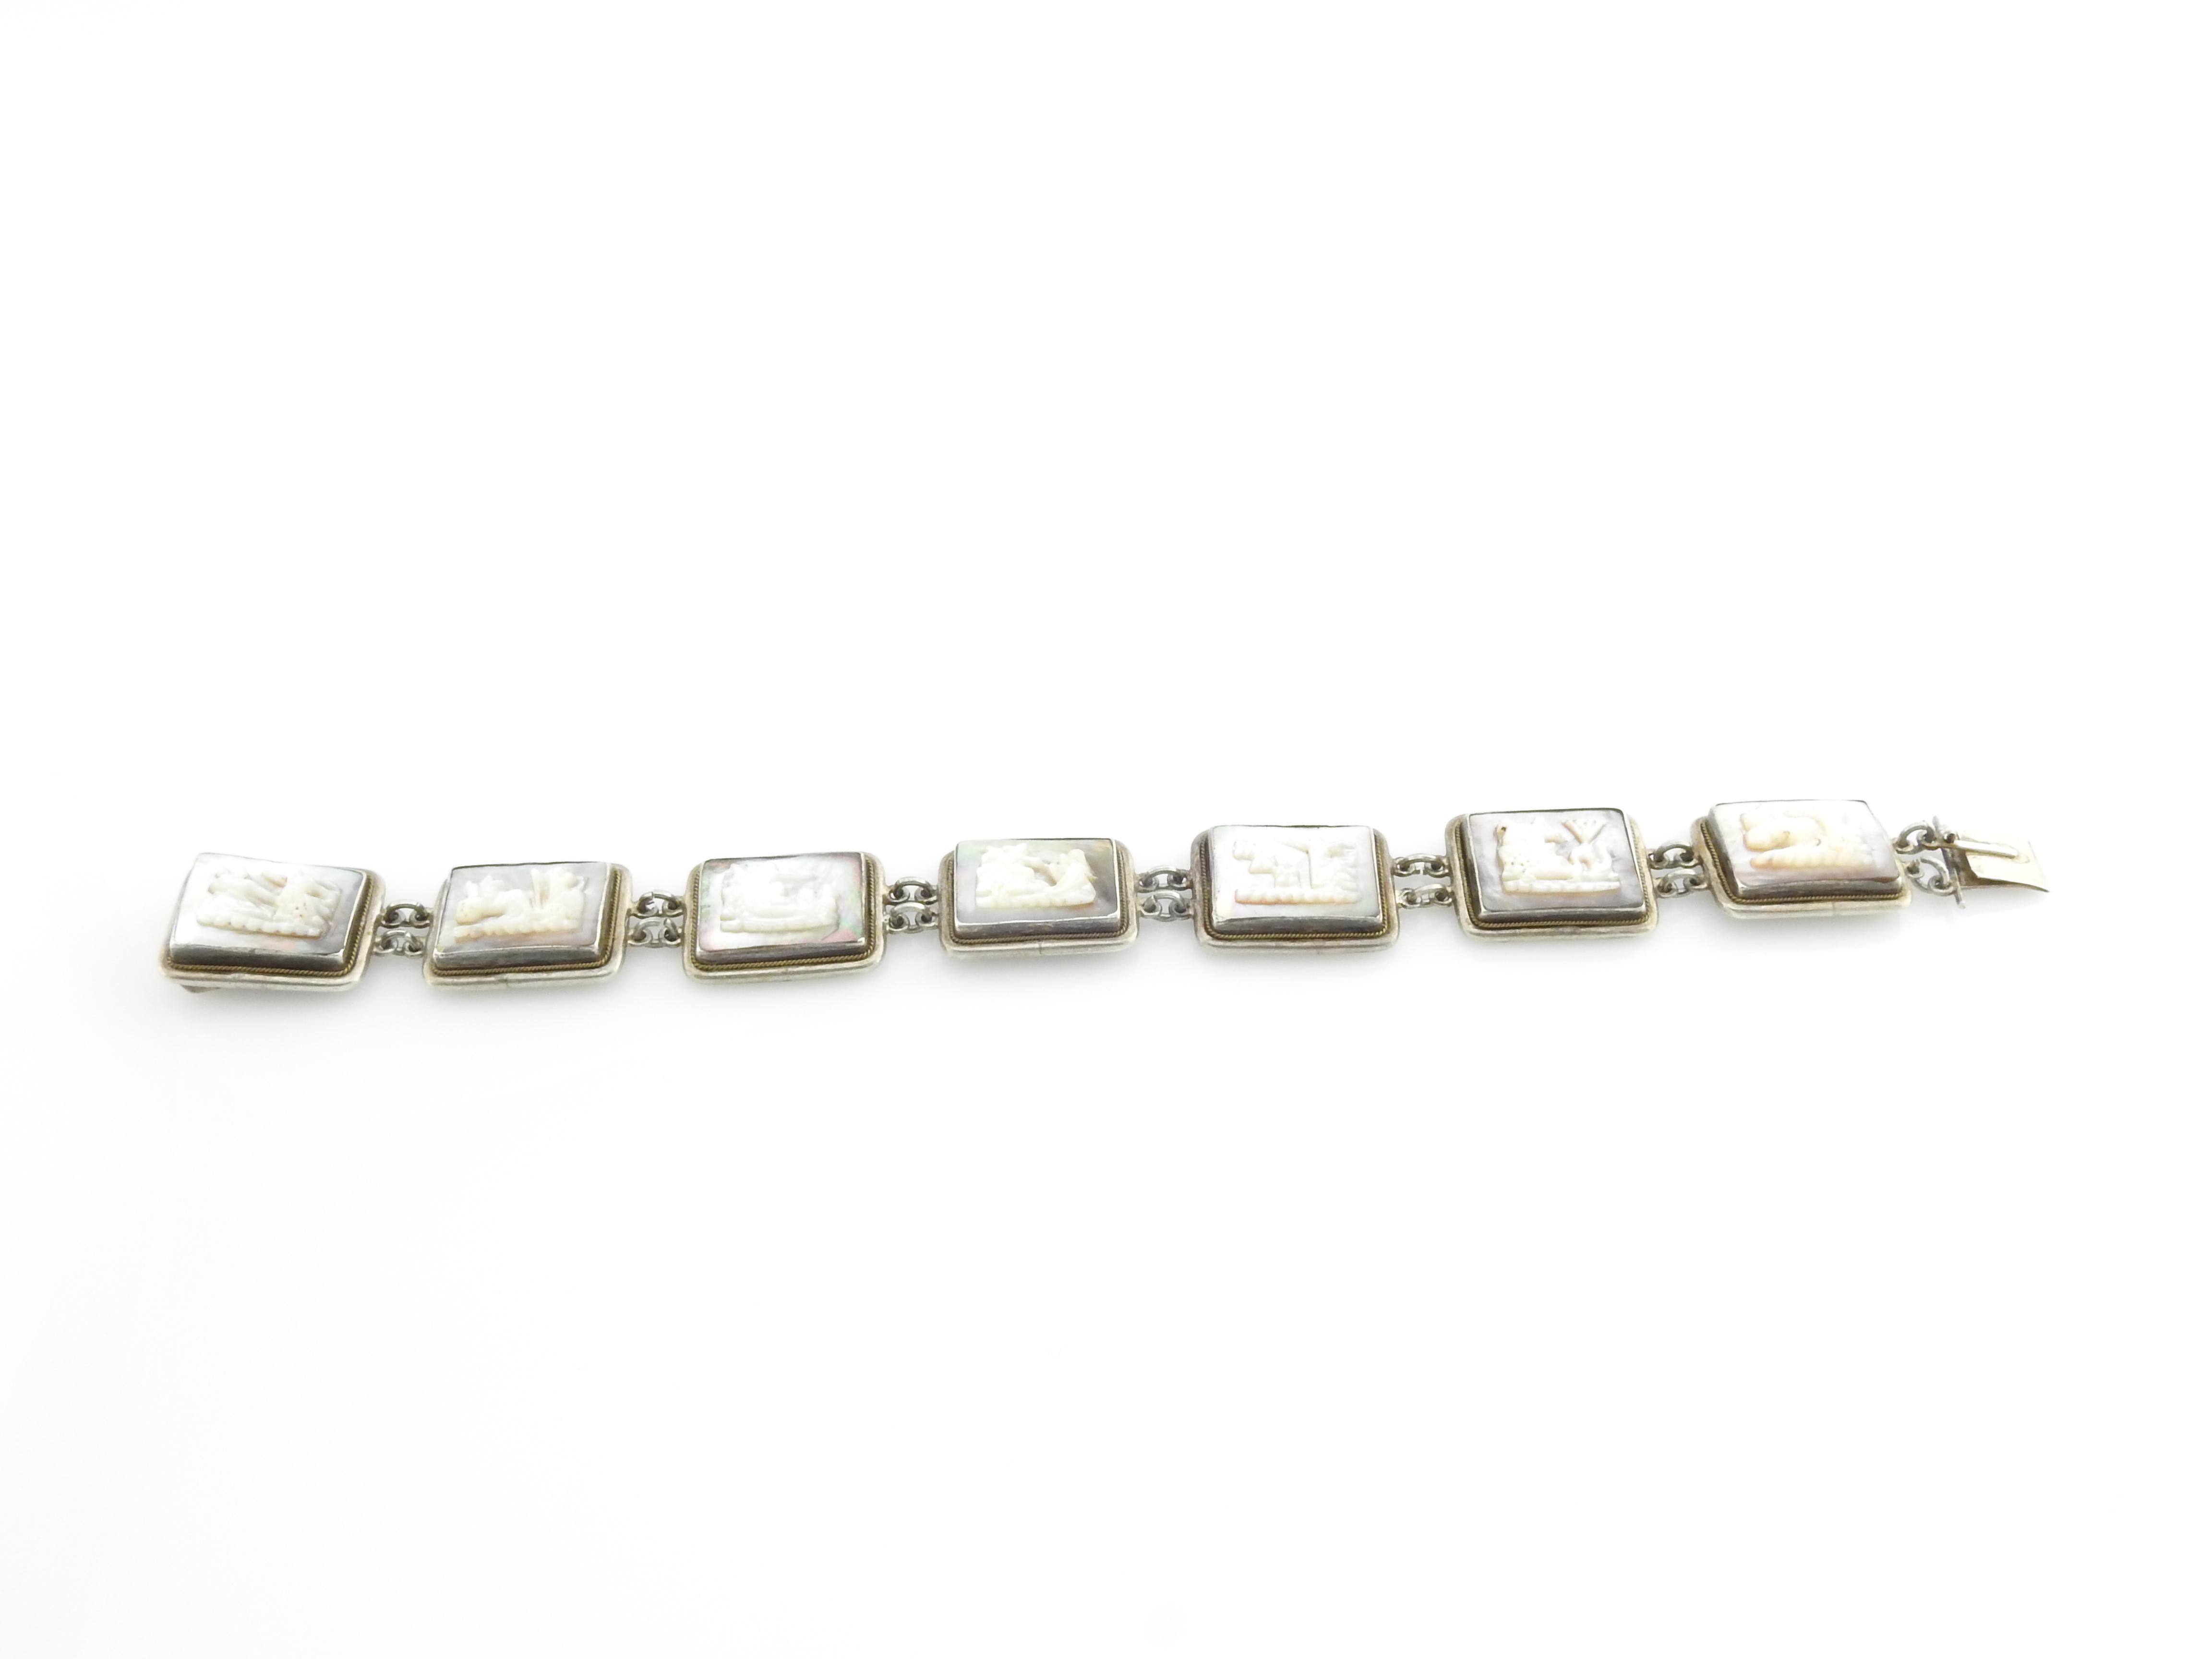 Portrait Cut 900 Sterling Silver Mother of Pearl and Abalone Bracelet